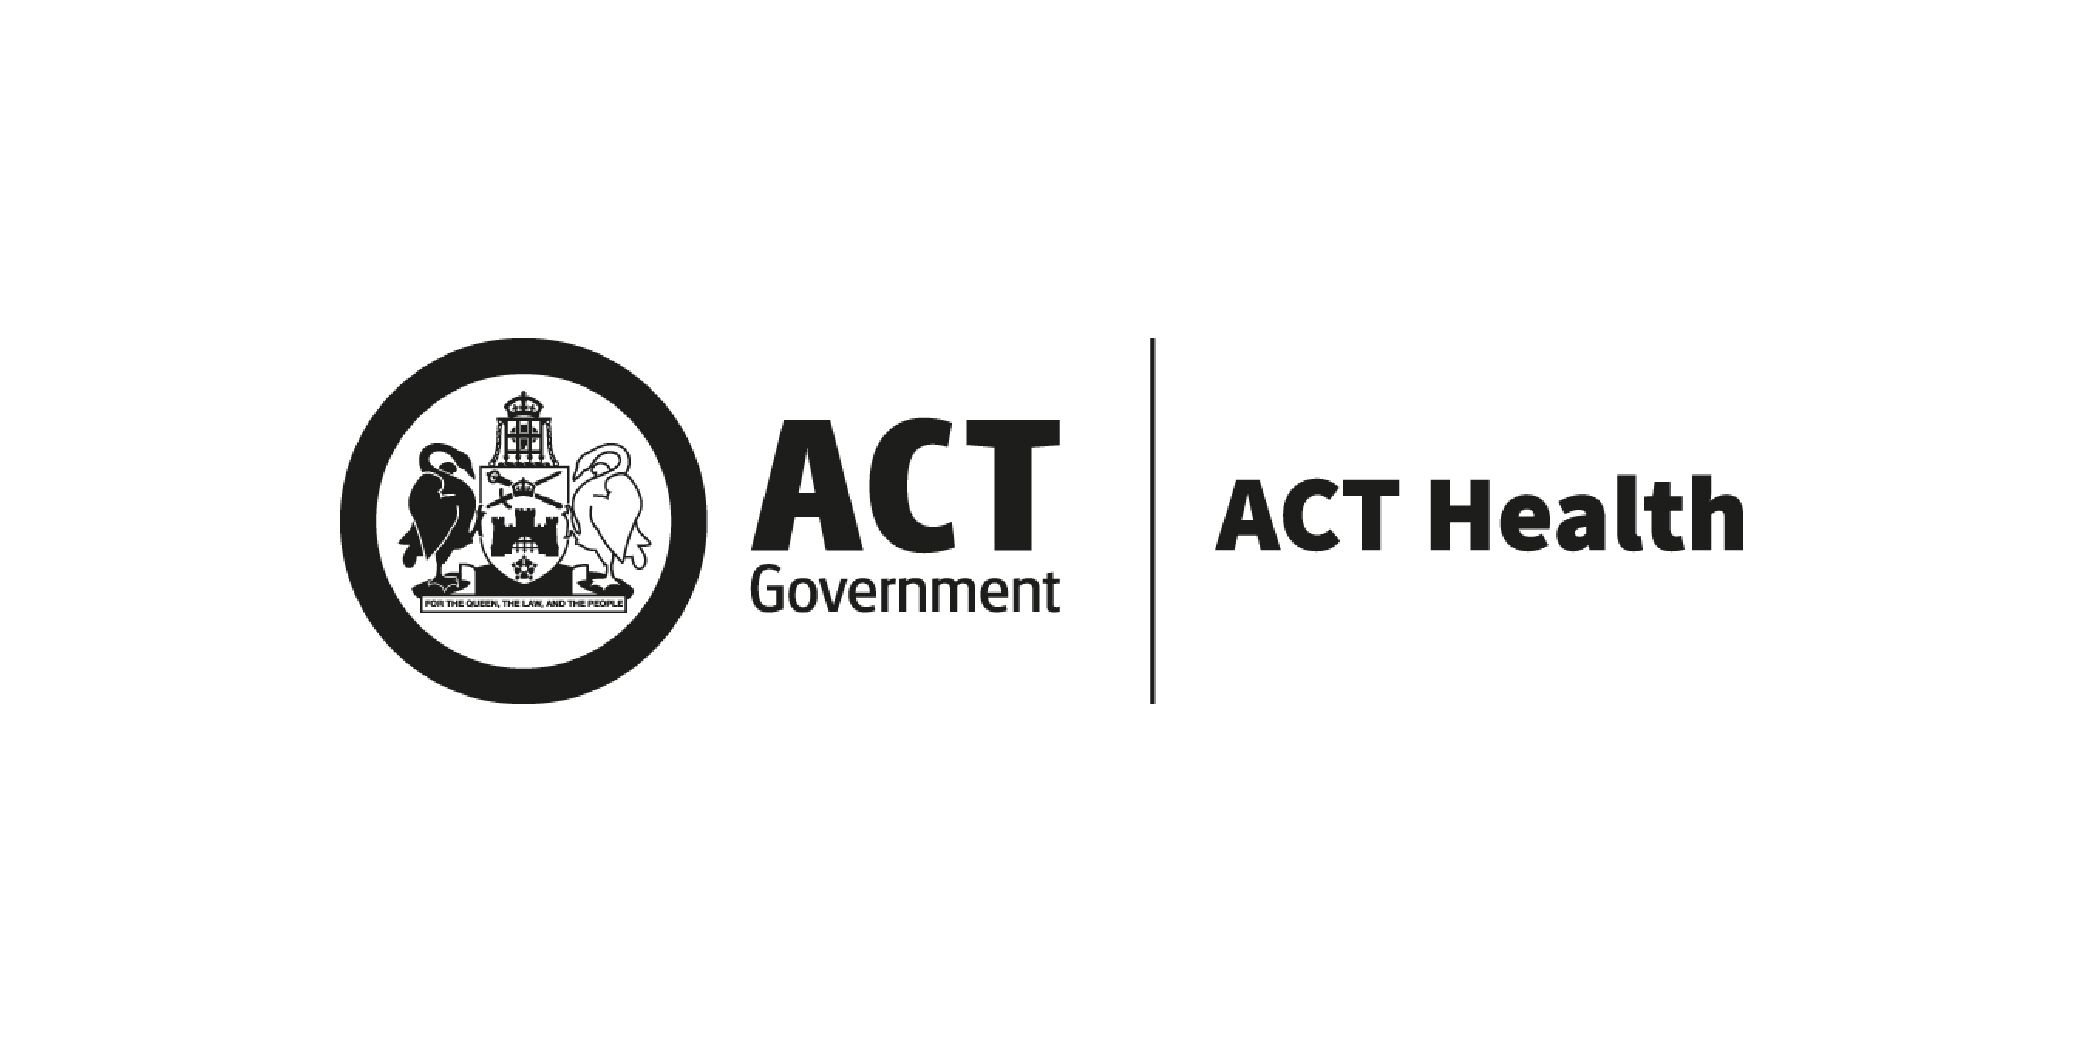 ACT Government Health